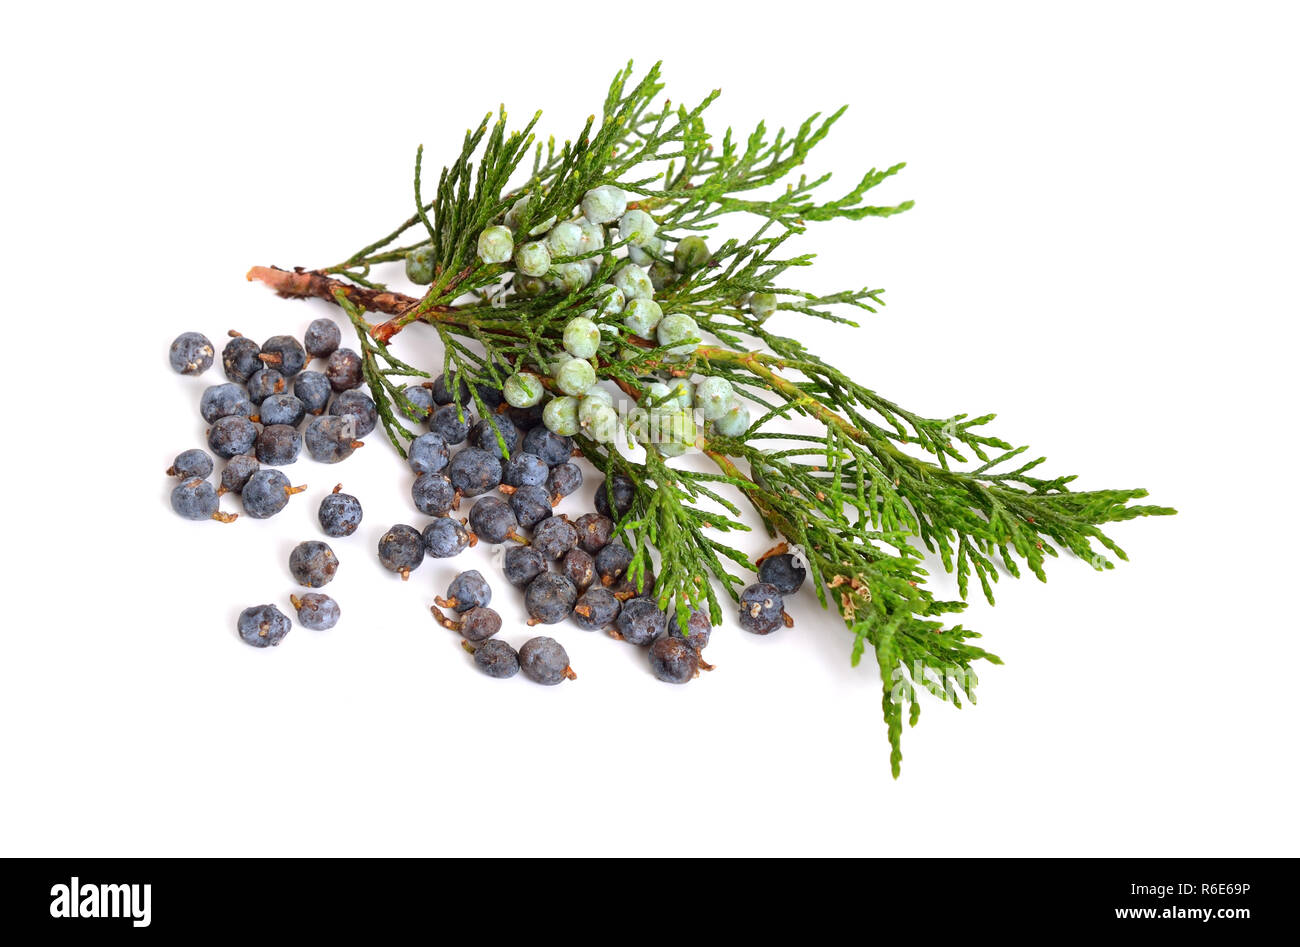 Juniperus sabina with green and ripe Cones (berries) isolated on white. Stock Photo